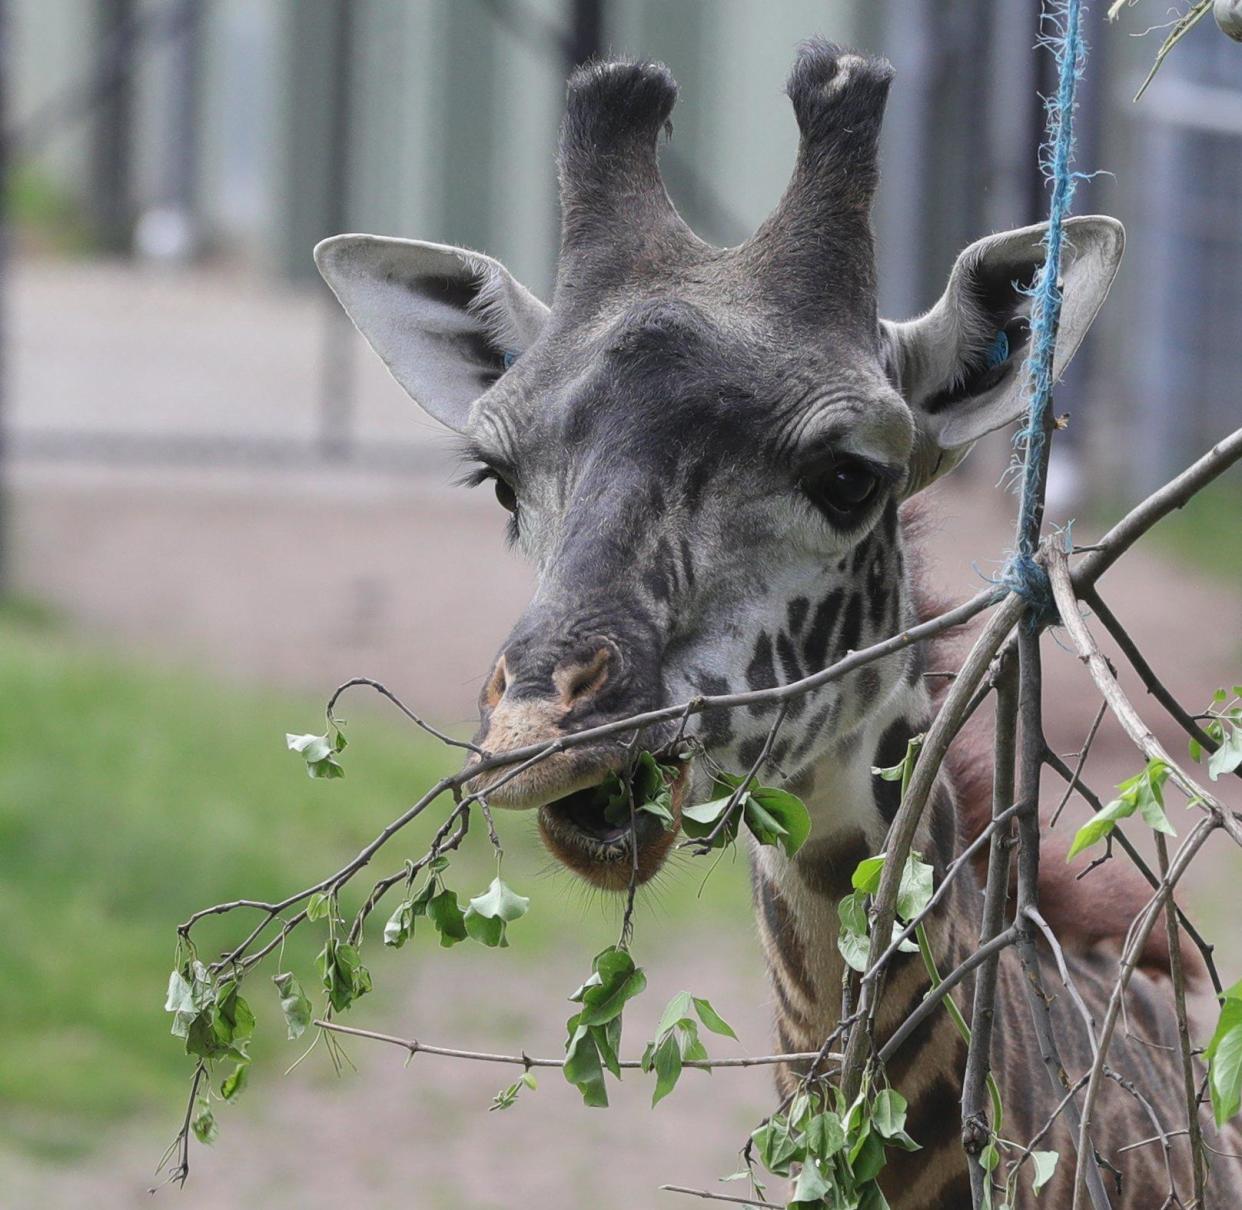 A giraffe munches on a tree branch during a drive-thru tour of the Cleveland Zoo on Thursday, May 21, 2020, Cleveland, Ohio. [Phil Masturzo/ Beacon Journal]